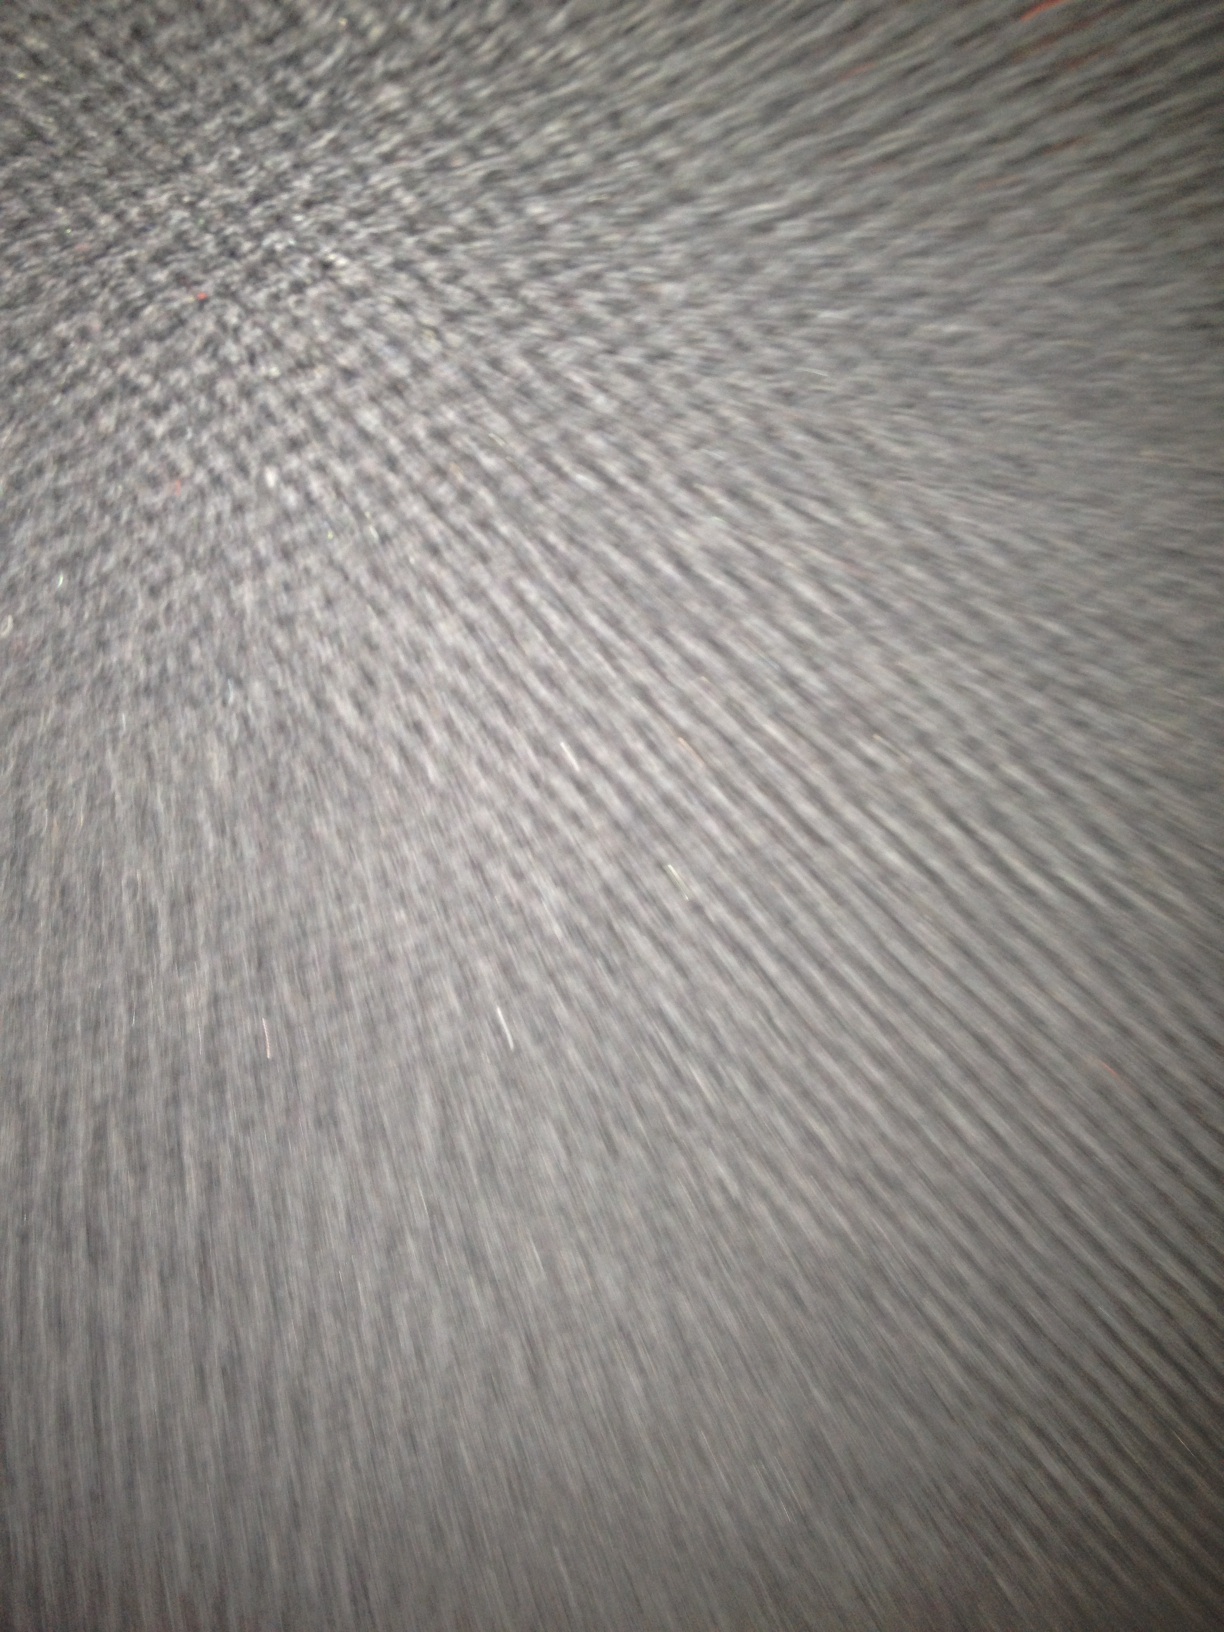 A photo captured by a person who is blind. A computer-generated caption for this photo is: A close up of a person on a white surface.